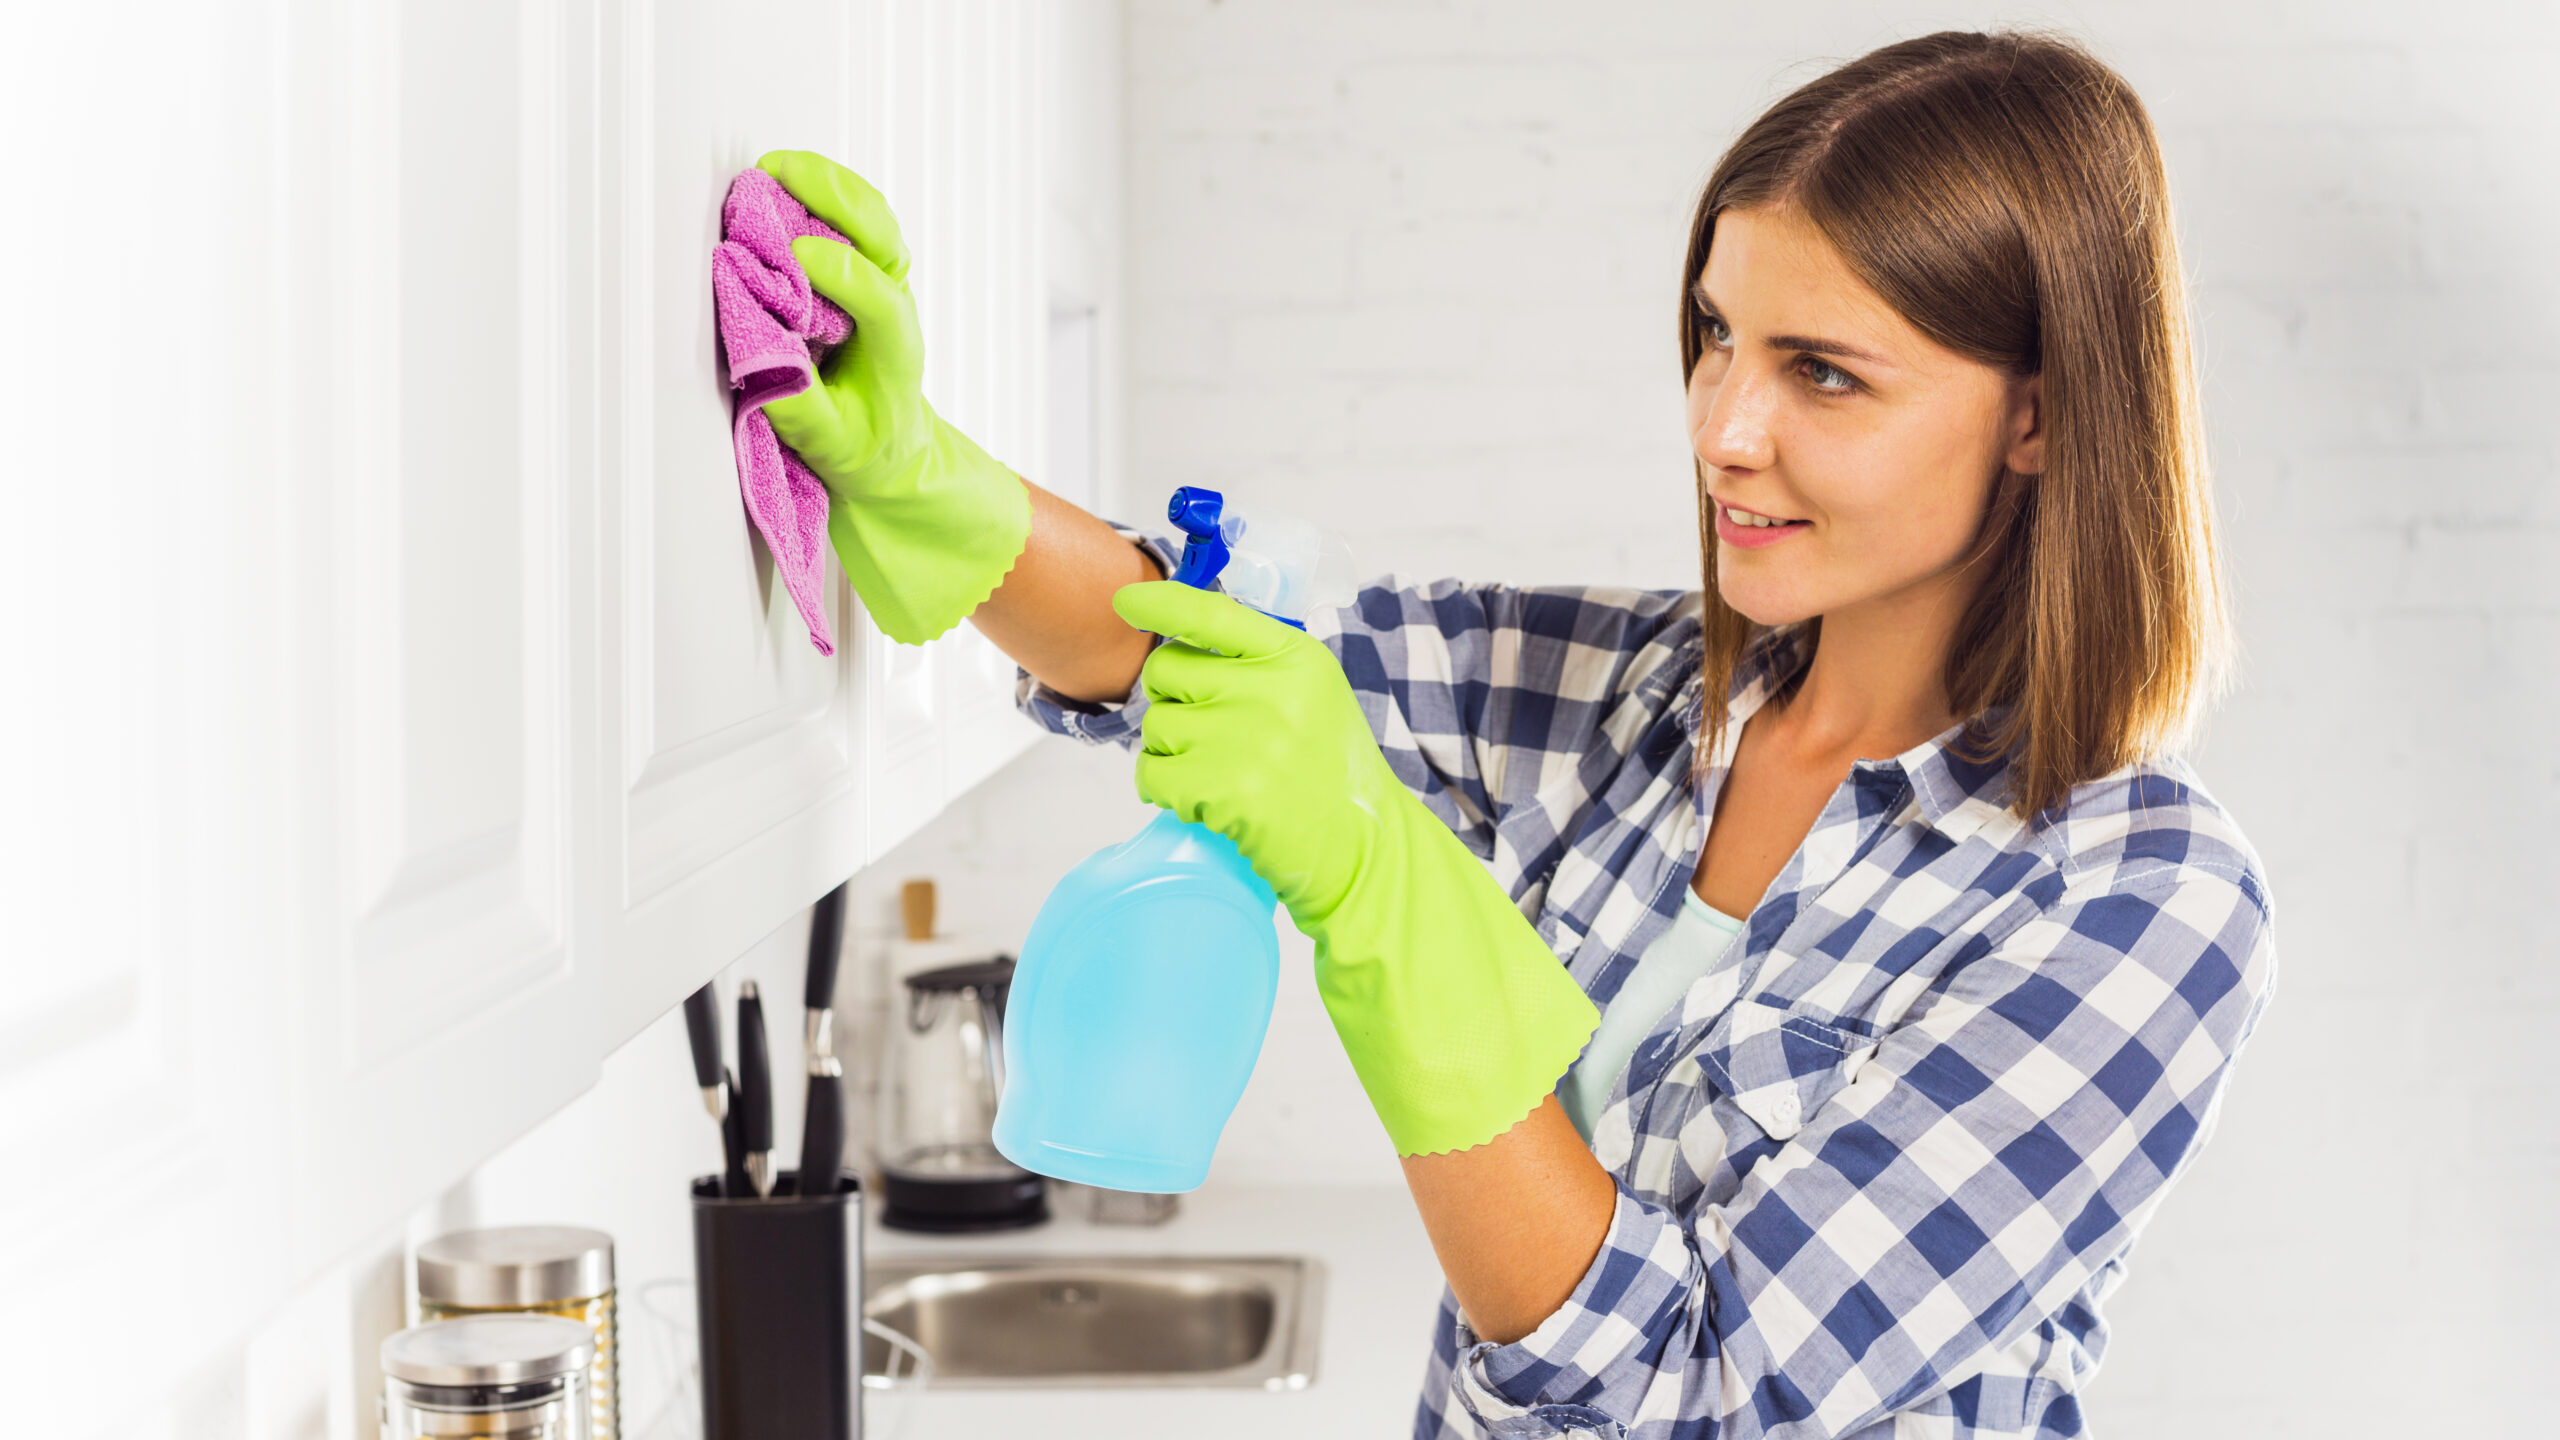 Our Top Domestic Cleaning Business Tips